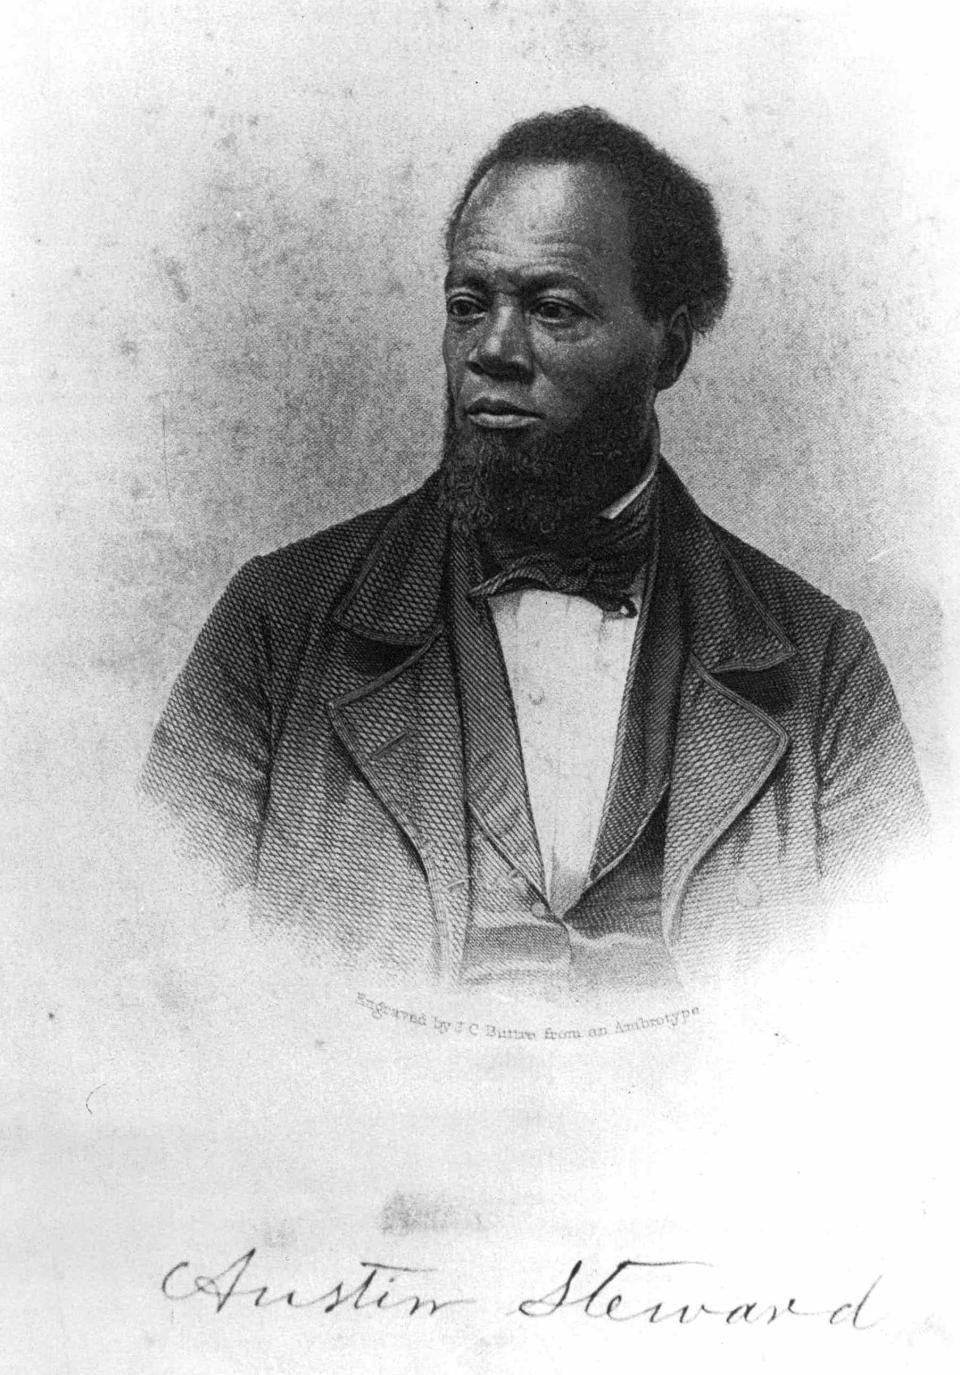 Austin Steward, Rochester business man, who wrote his autobiography "Twenty-two Years a Slave and Forty Years a Freeman". This engraving is from that book, 1857.